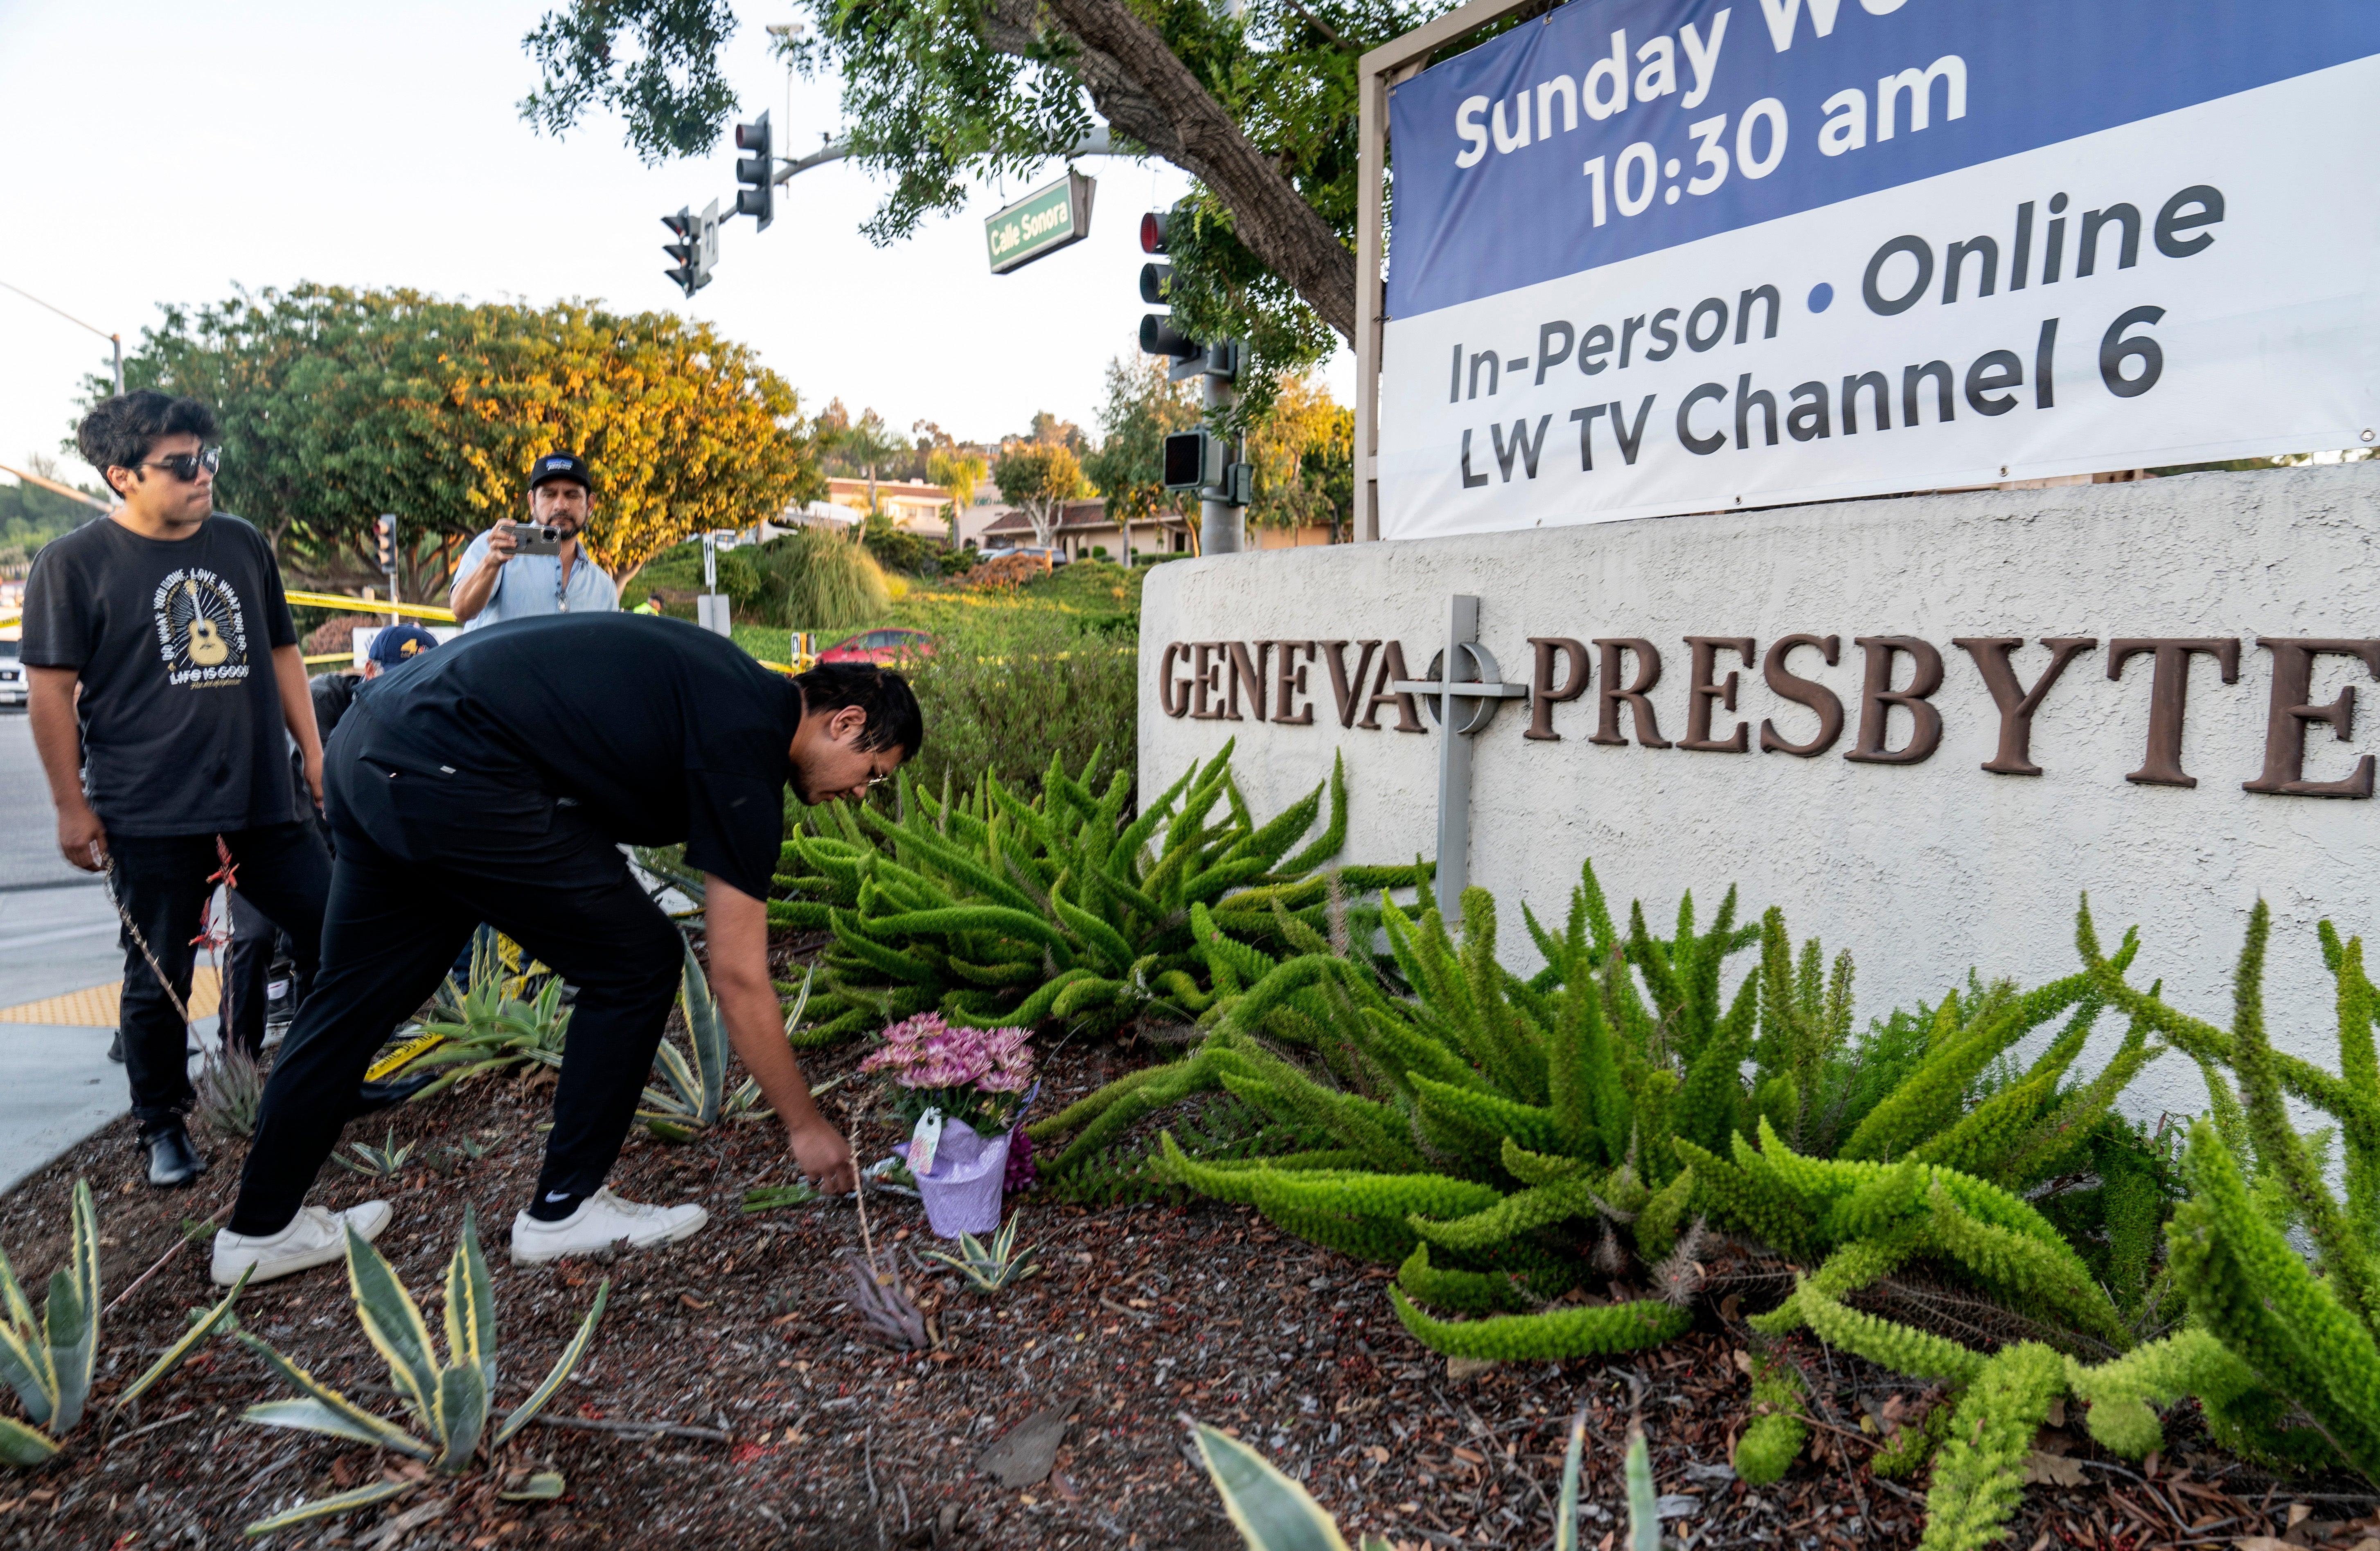 Hector Gomez, left, and Jordi Poblete, worship leaders at the Mariners Church Irvine, leave flowers outside the Geneva Presbyterian Church in Laguna Woods